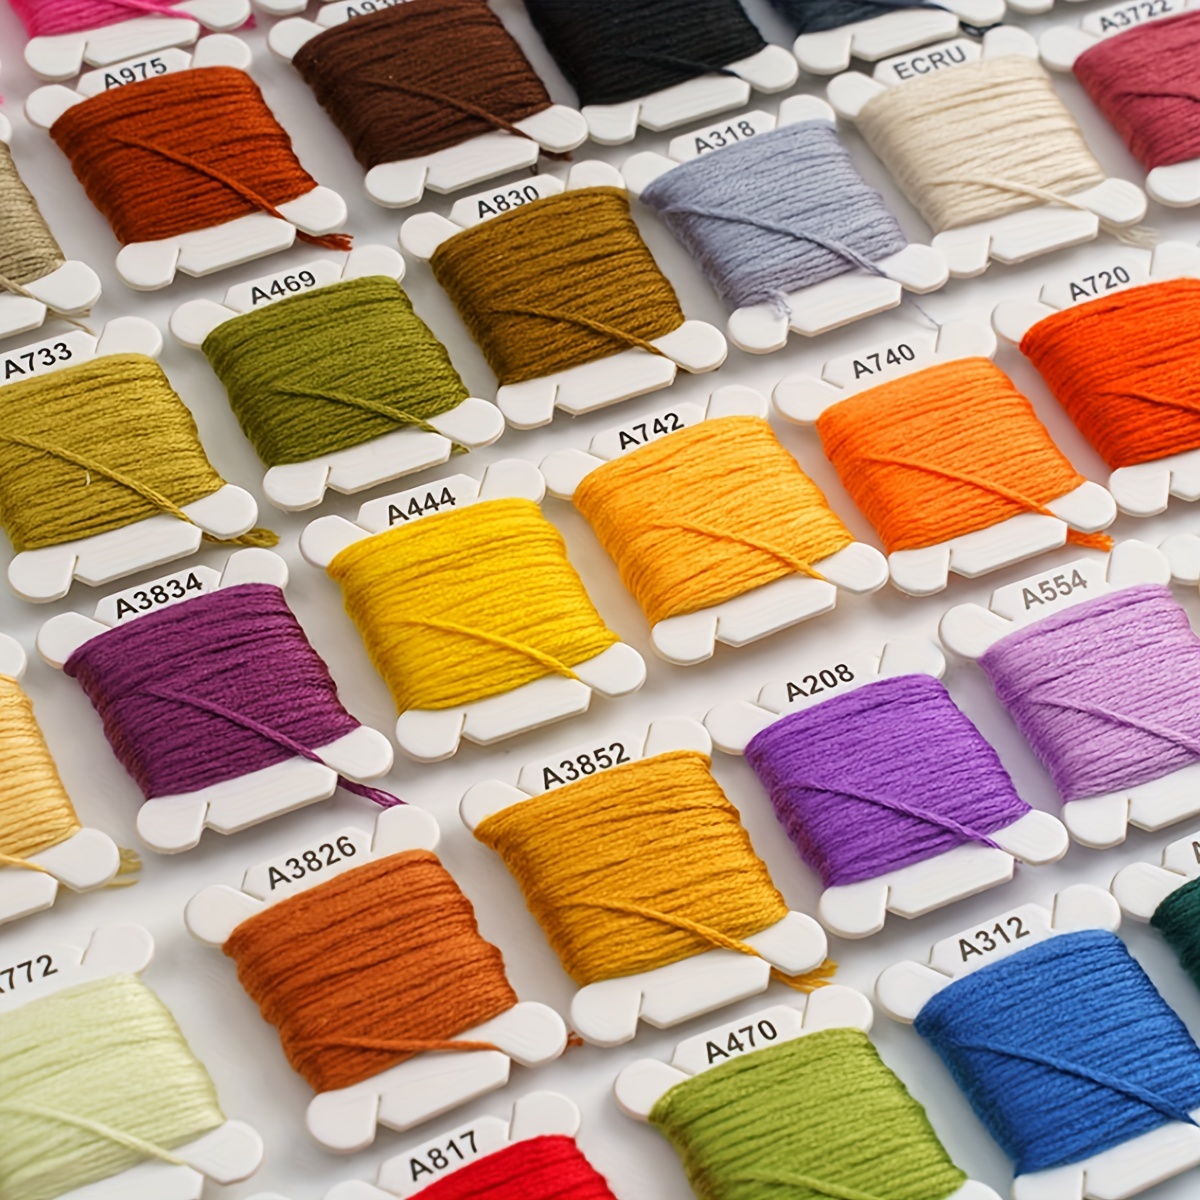 Embroidery Yarn Color Pack, Yarn